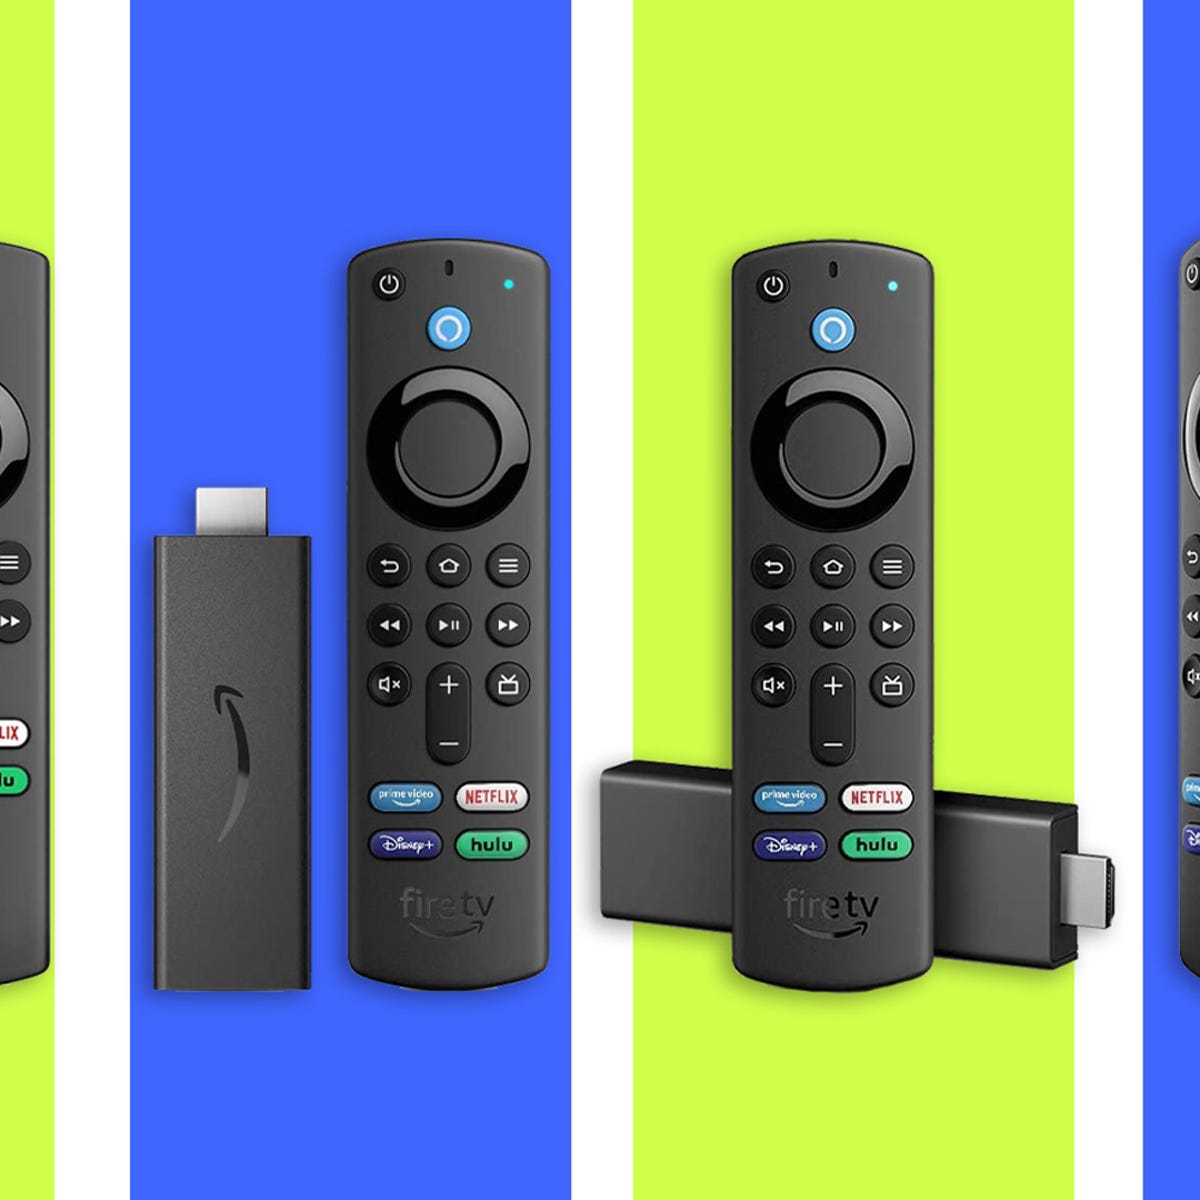 Fire TV Stick comparison: How they stack up to each other